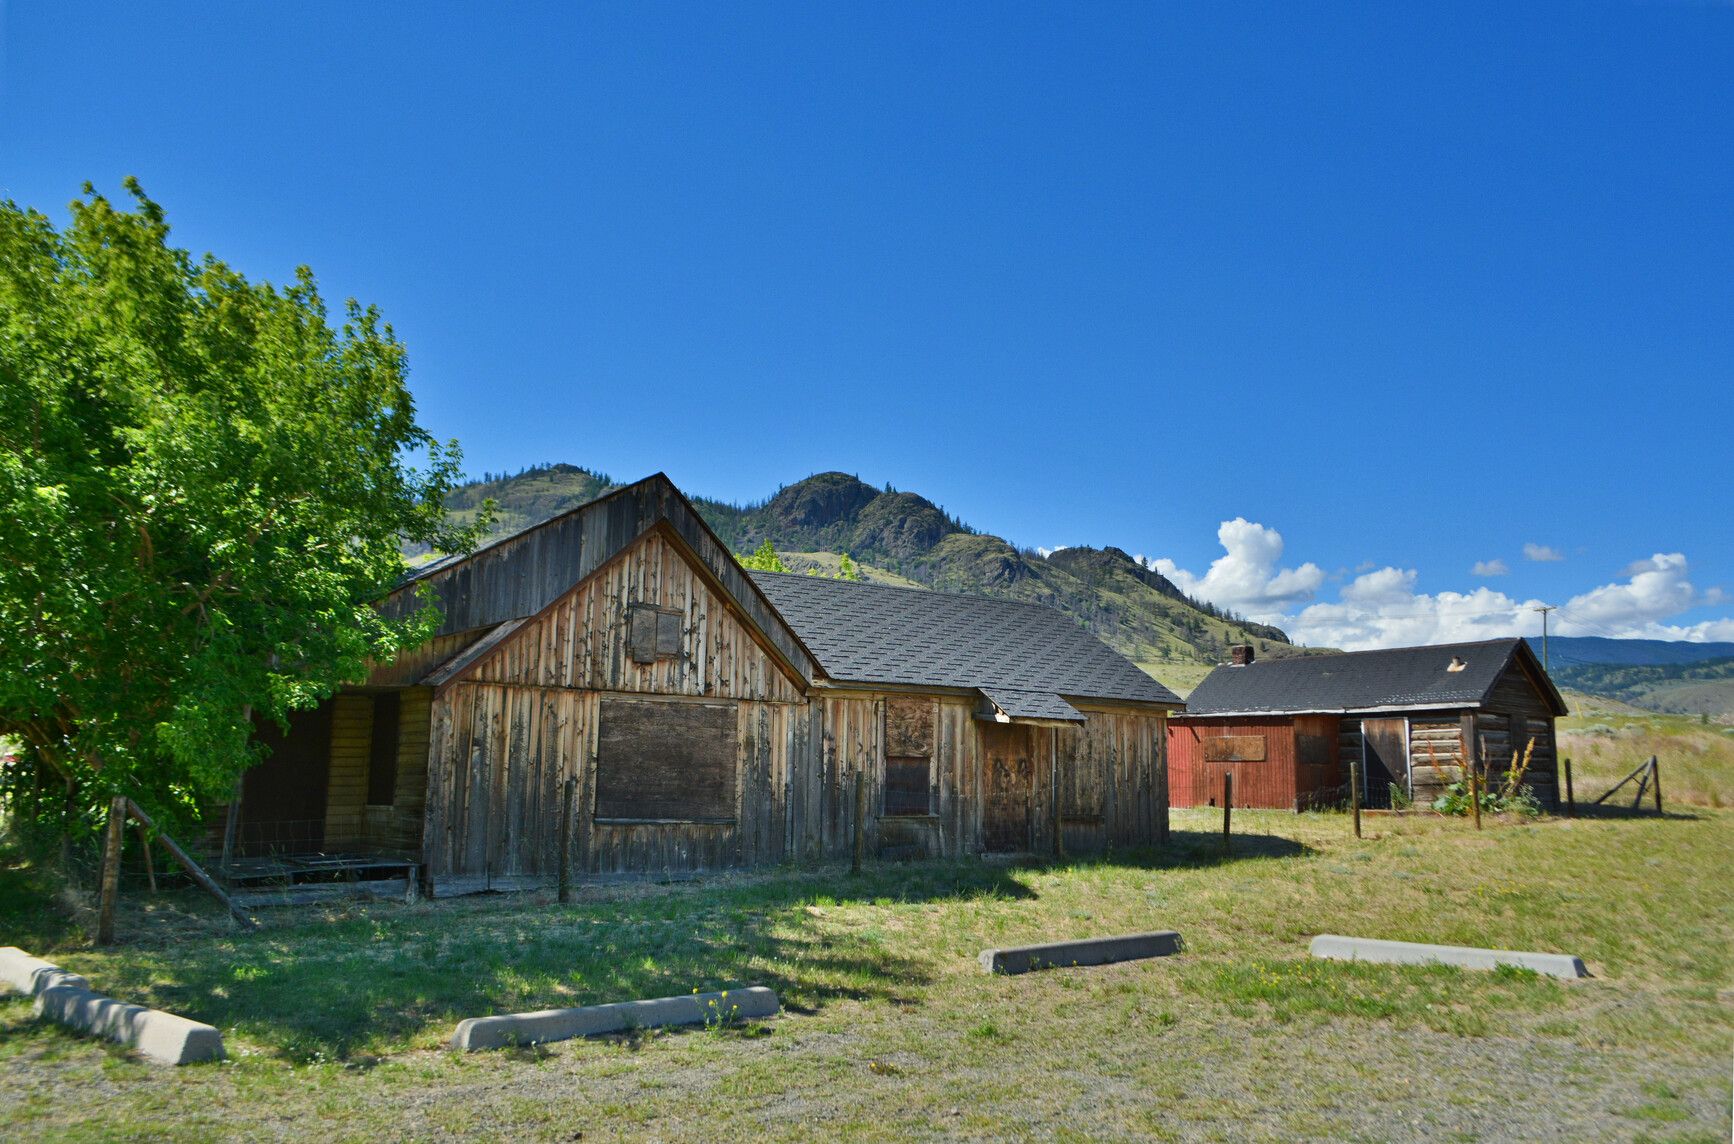 Explore the historic buildings at Steelhead Park, one of the oldest homesteads in the southern interior, which served as both a stagecoach depot and a ferry landing.